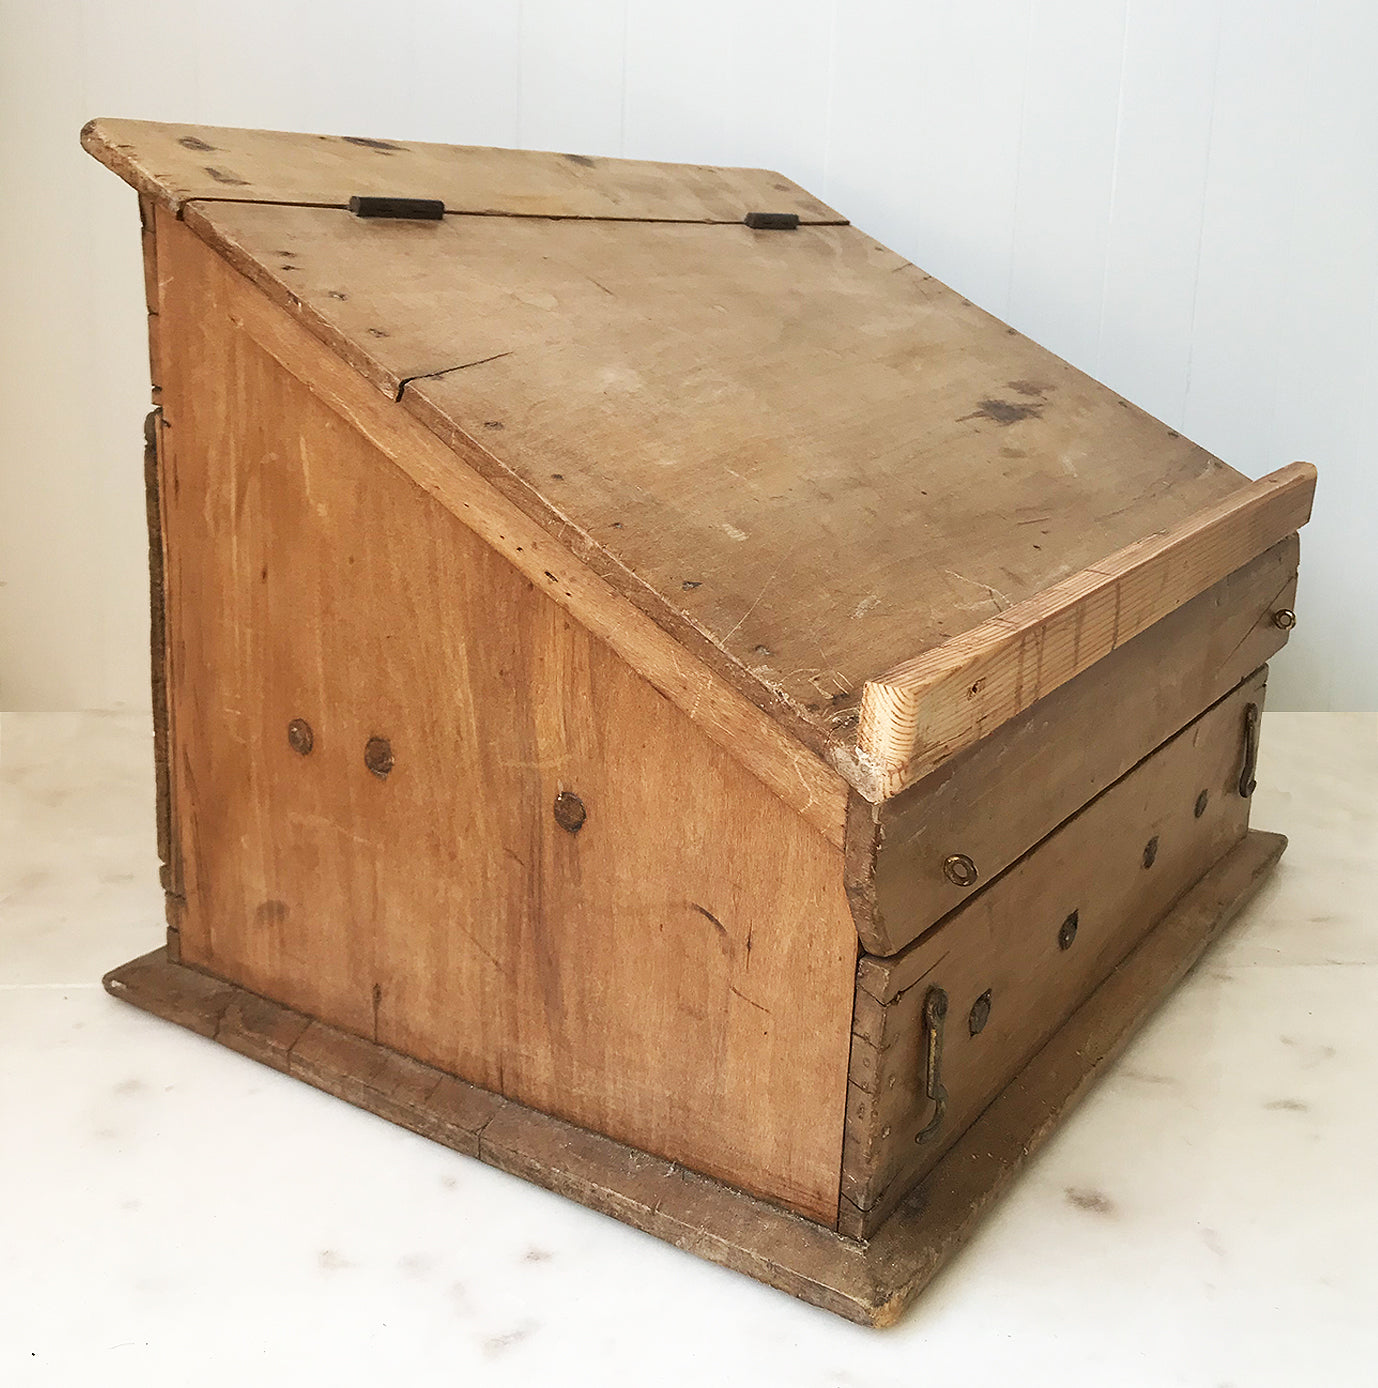 Practical Vintage Scratch Built Reading Slope Box made from pine. Flip the brass catches on the front and the slope lifts up lid so you can store things inside. It has a great rustic look and would look great in a farmhouse kitchen - SHOP NOW - www.intovintage.co.uk